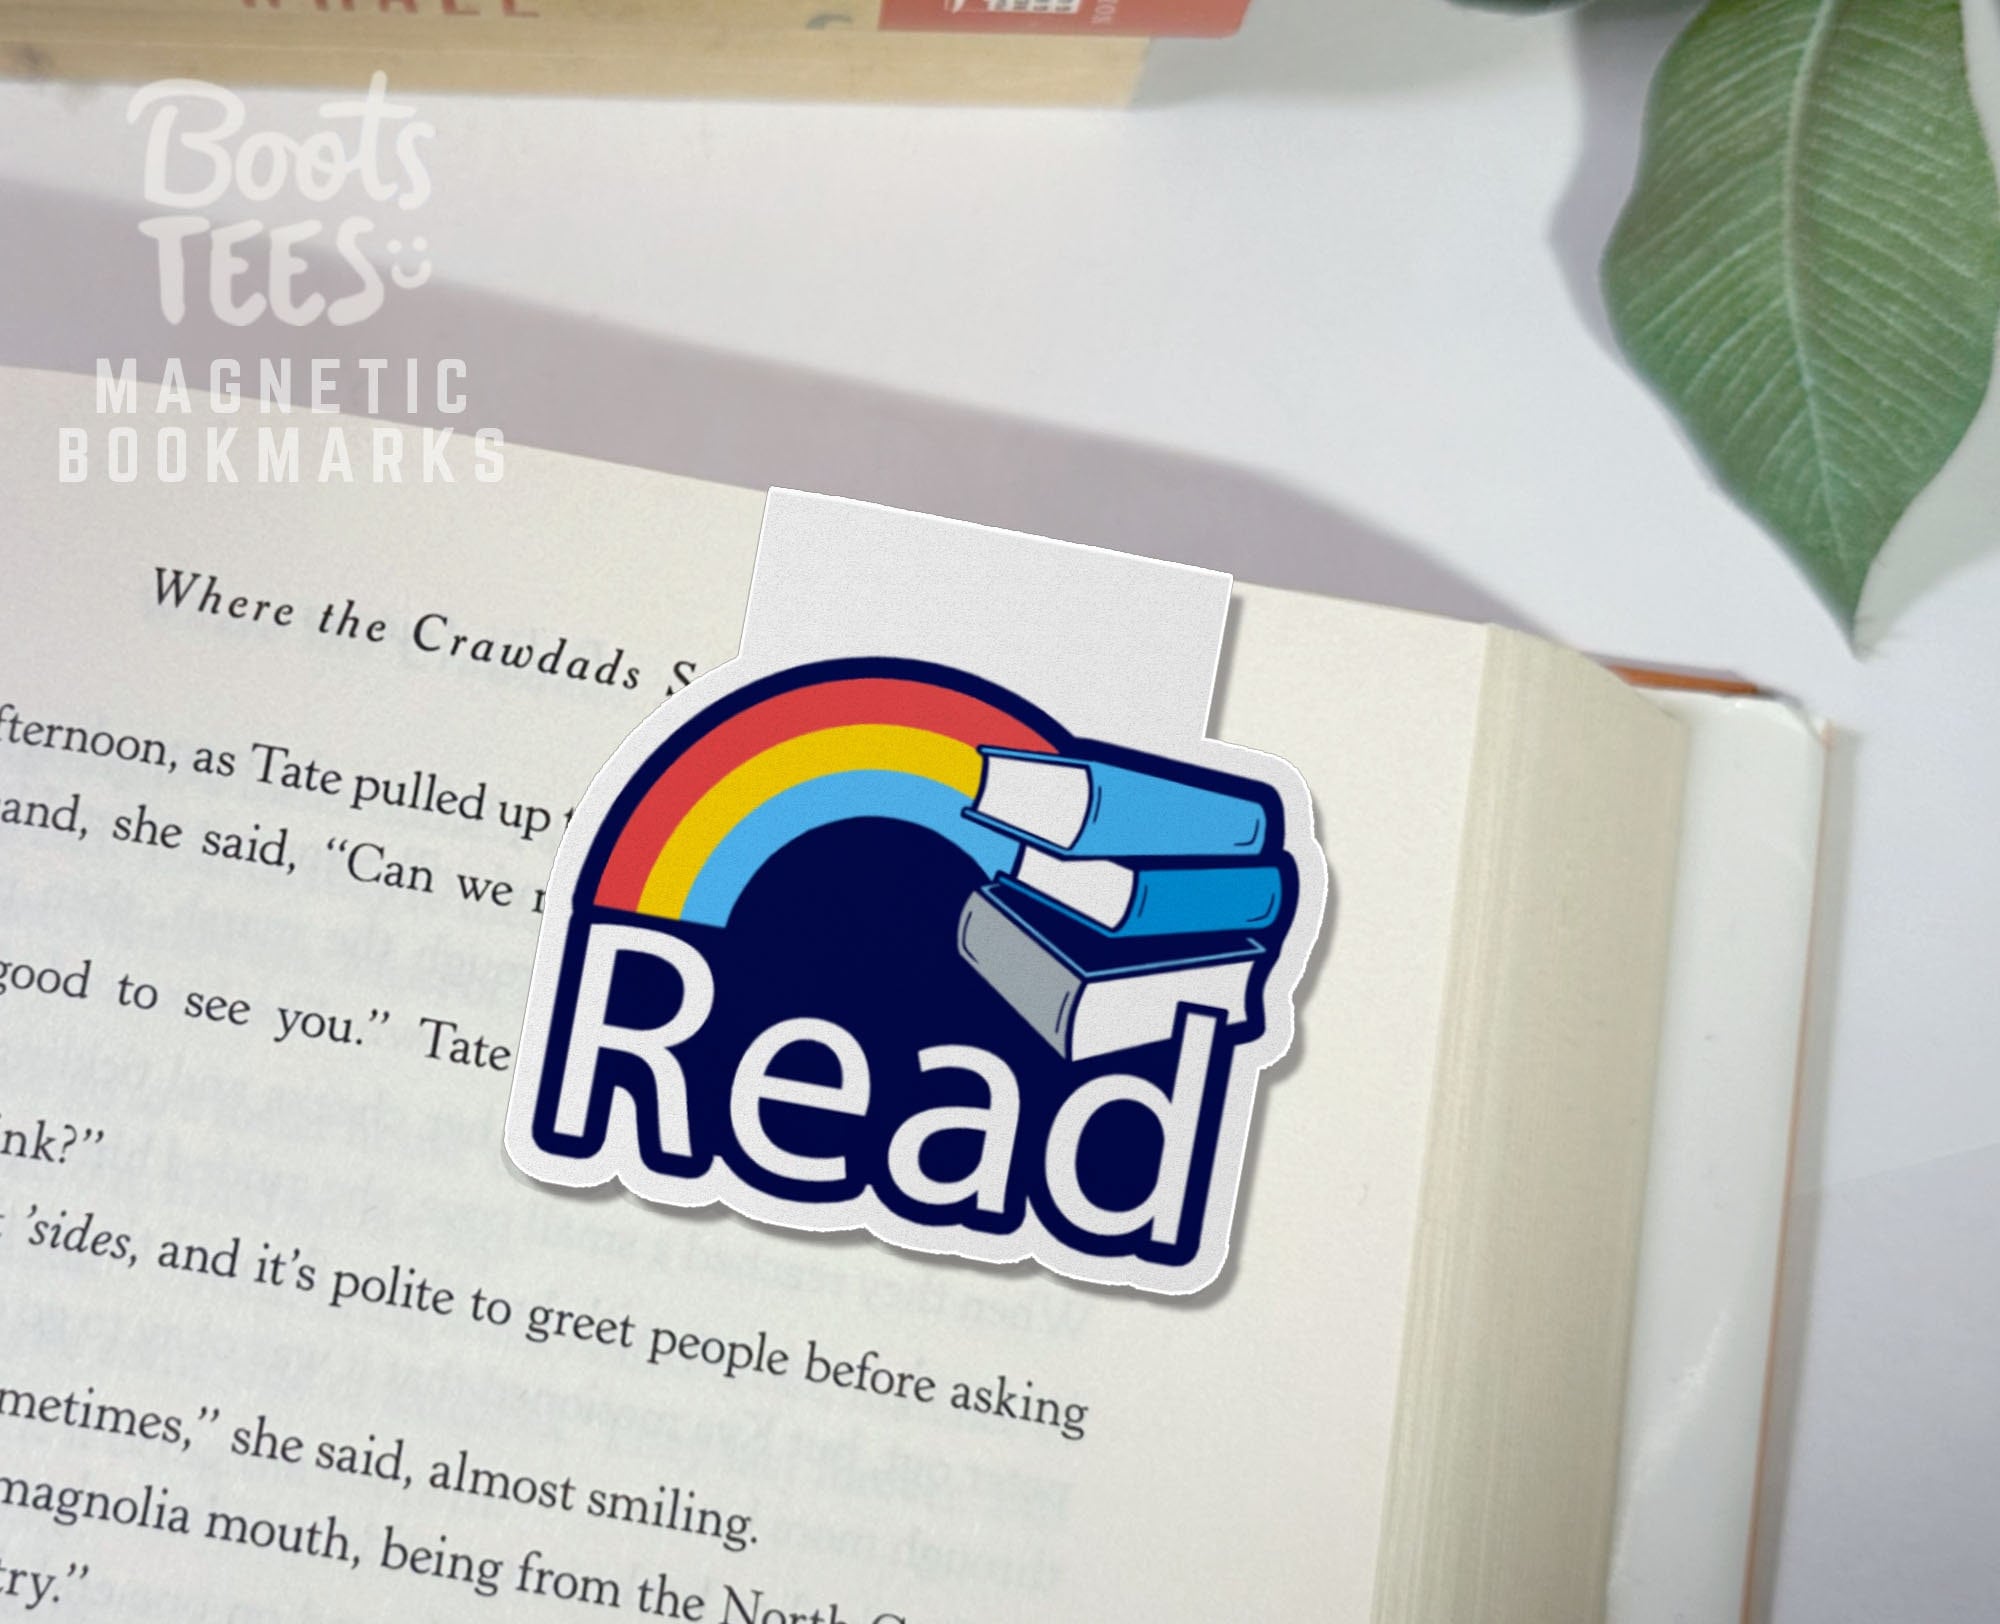 Read Rainbow Bookmark, One (1) Bookmark by BootsTees